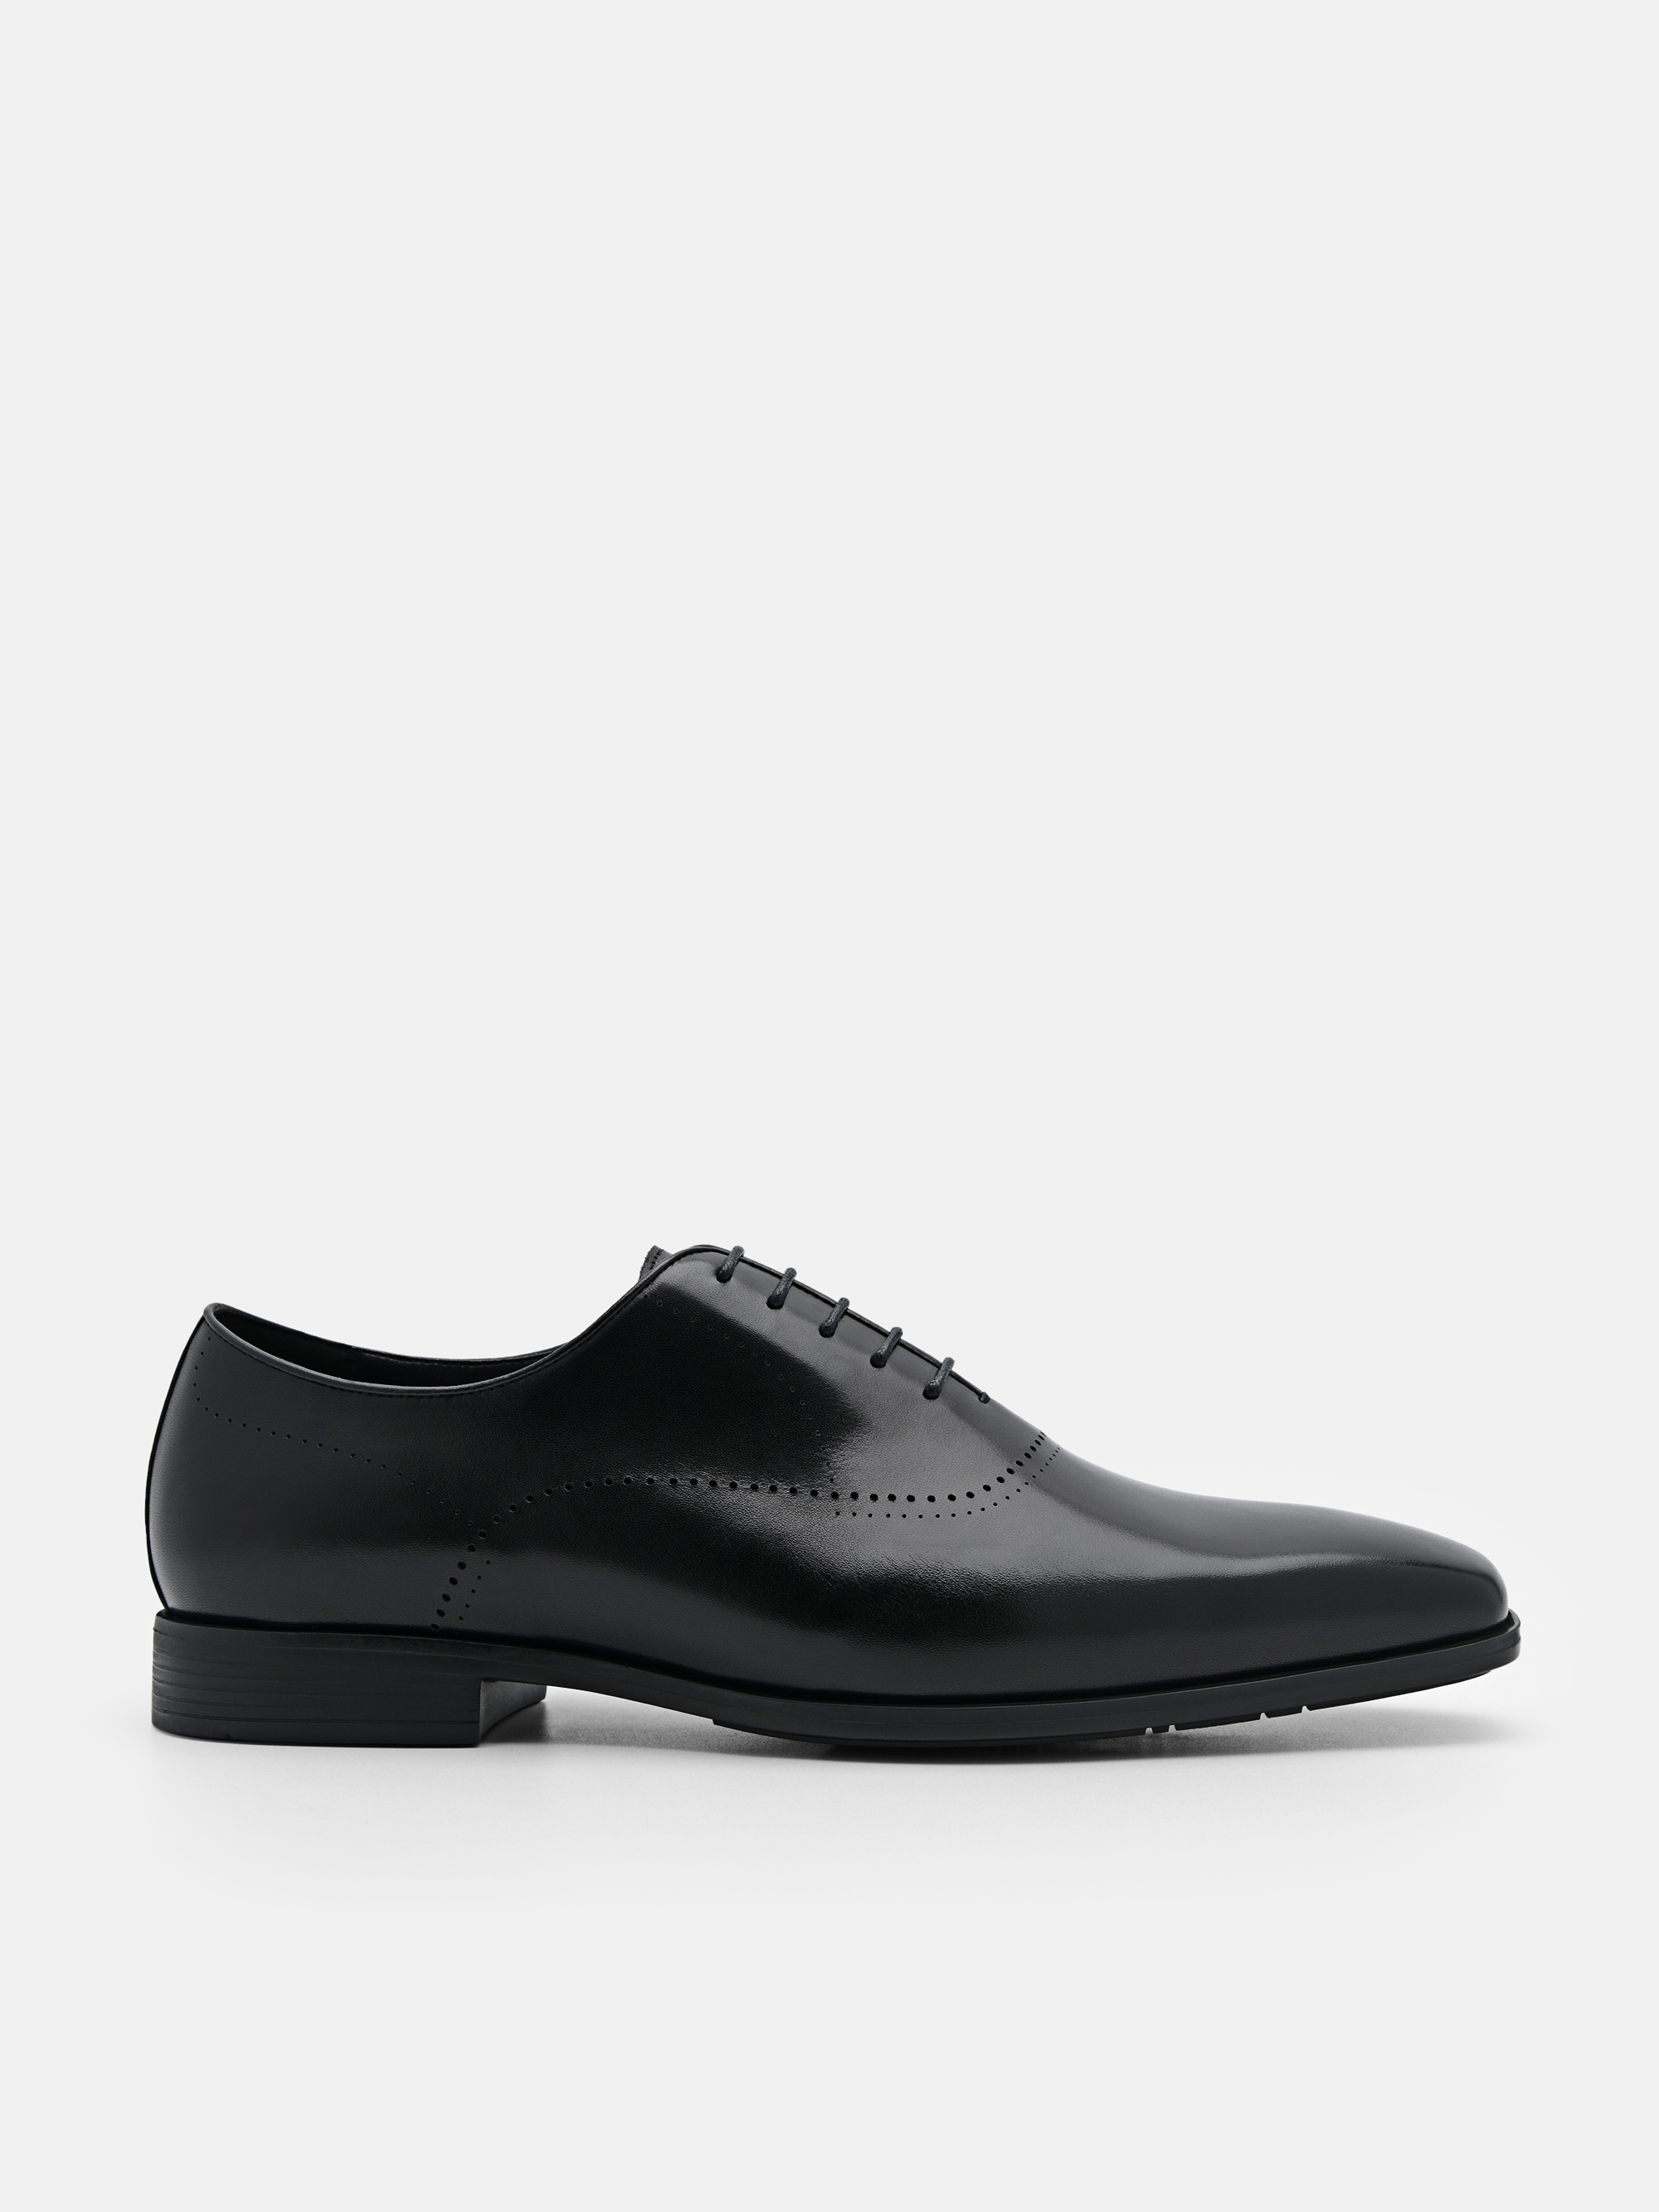 Black Altitude Lightweight Leather Oxford Shoes - PEDRO SG